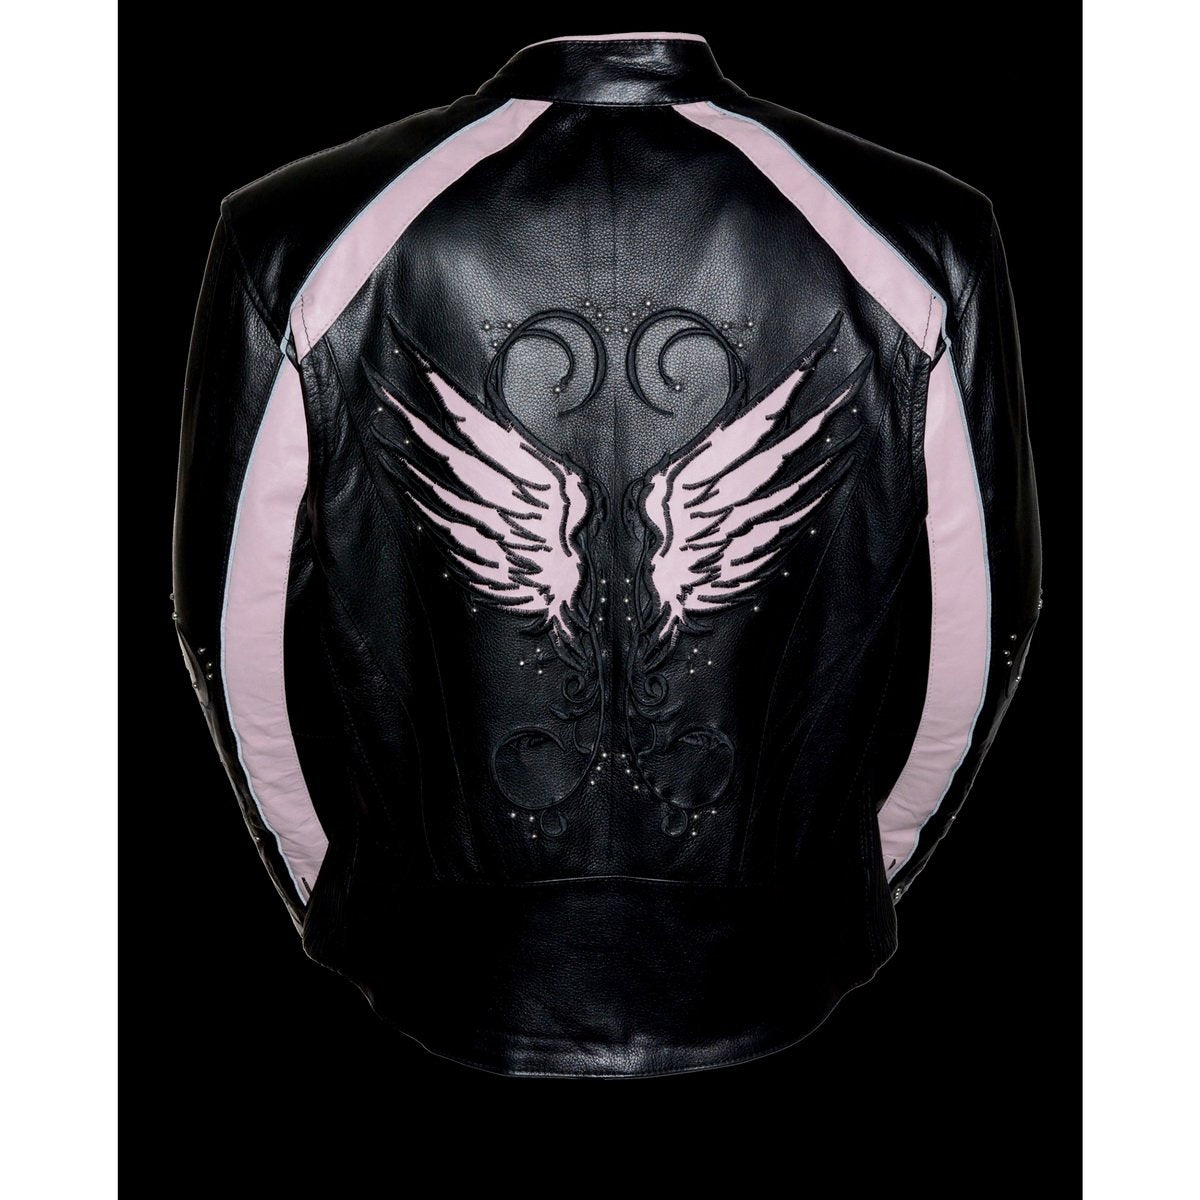 Milwaukee Leather ML1952 Women's Black and Pink Embroidered and Stud Design Jacket with Gun Pockets - Milwaukee Leather Womens Leather Jackets